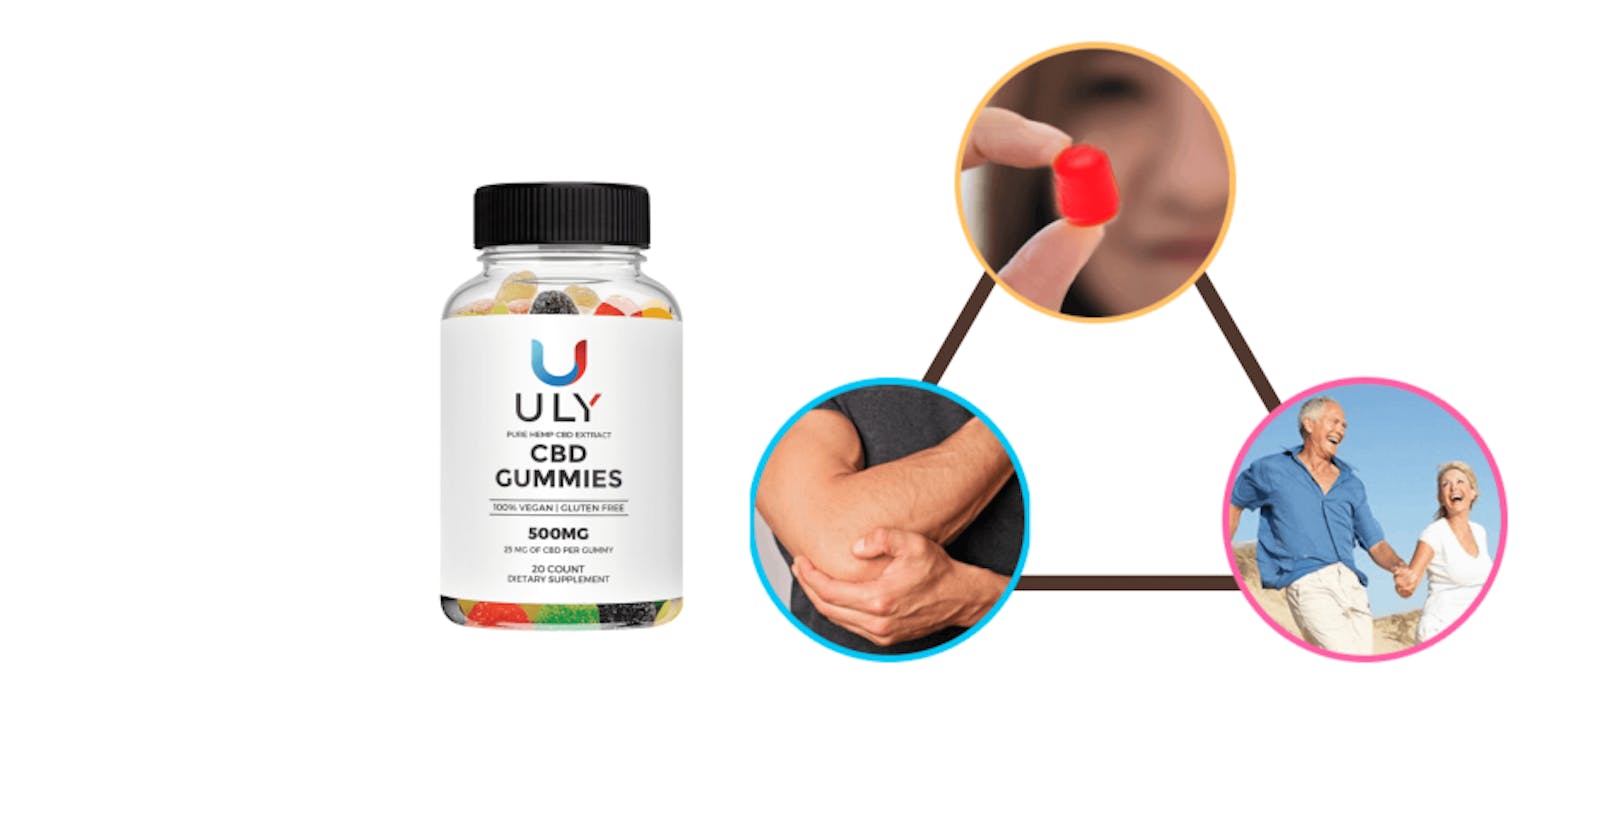 Uly CBD Gummies Reviews 2023 - [Scam or Legit] Read It First Before You Buy